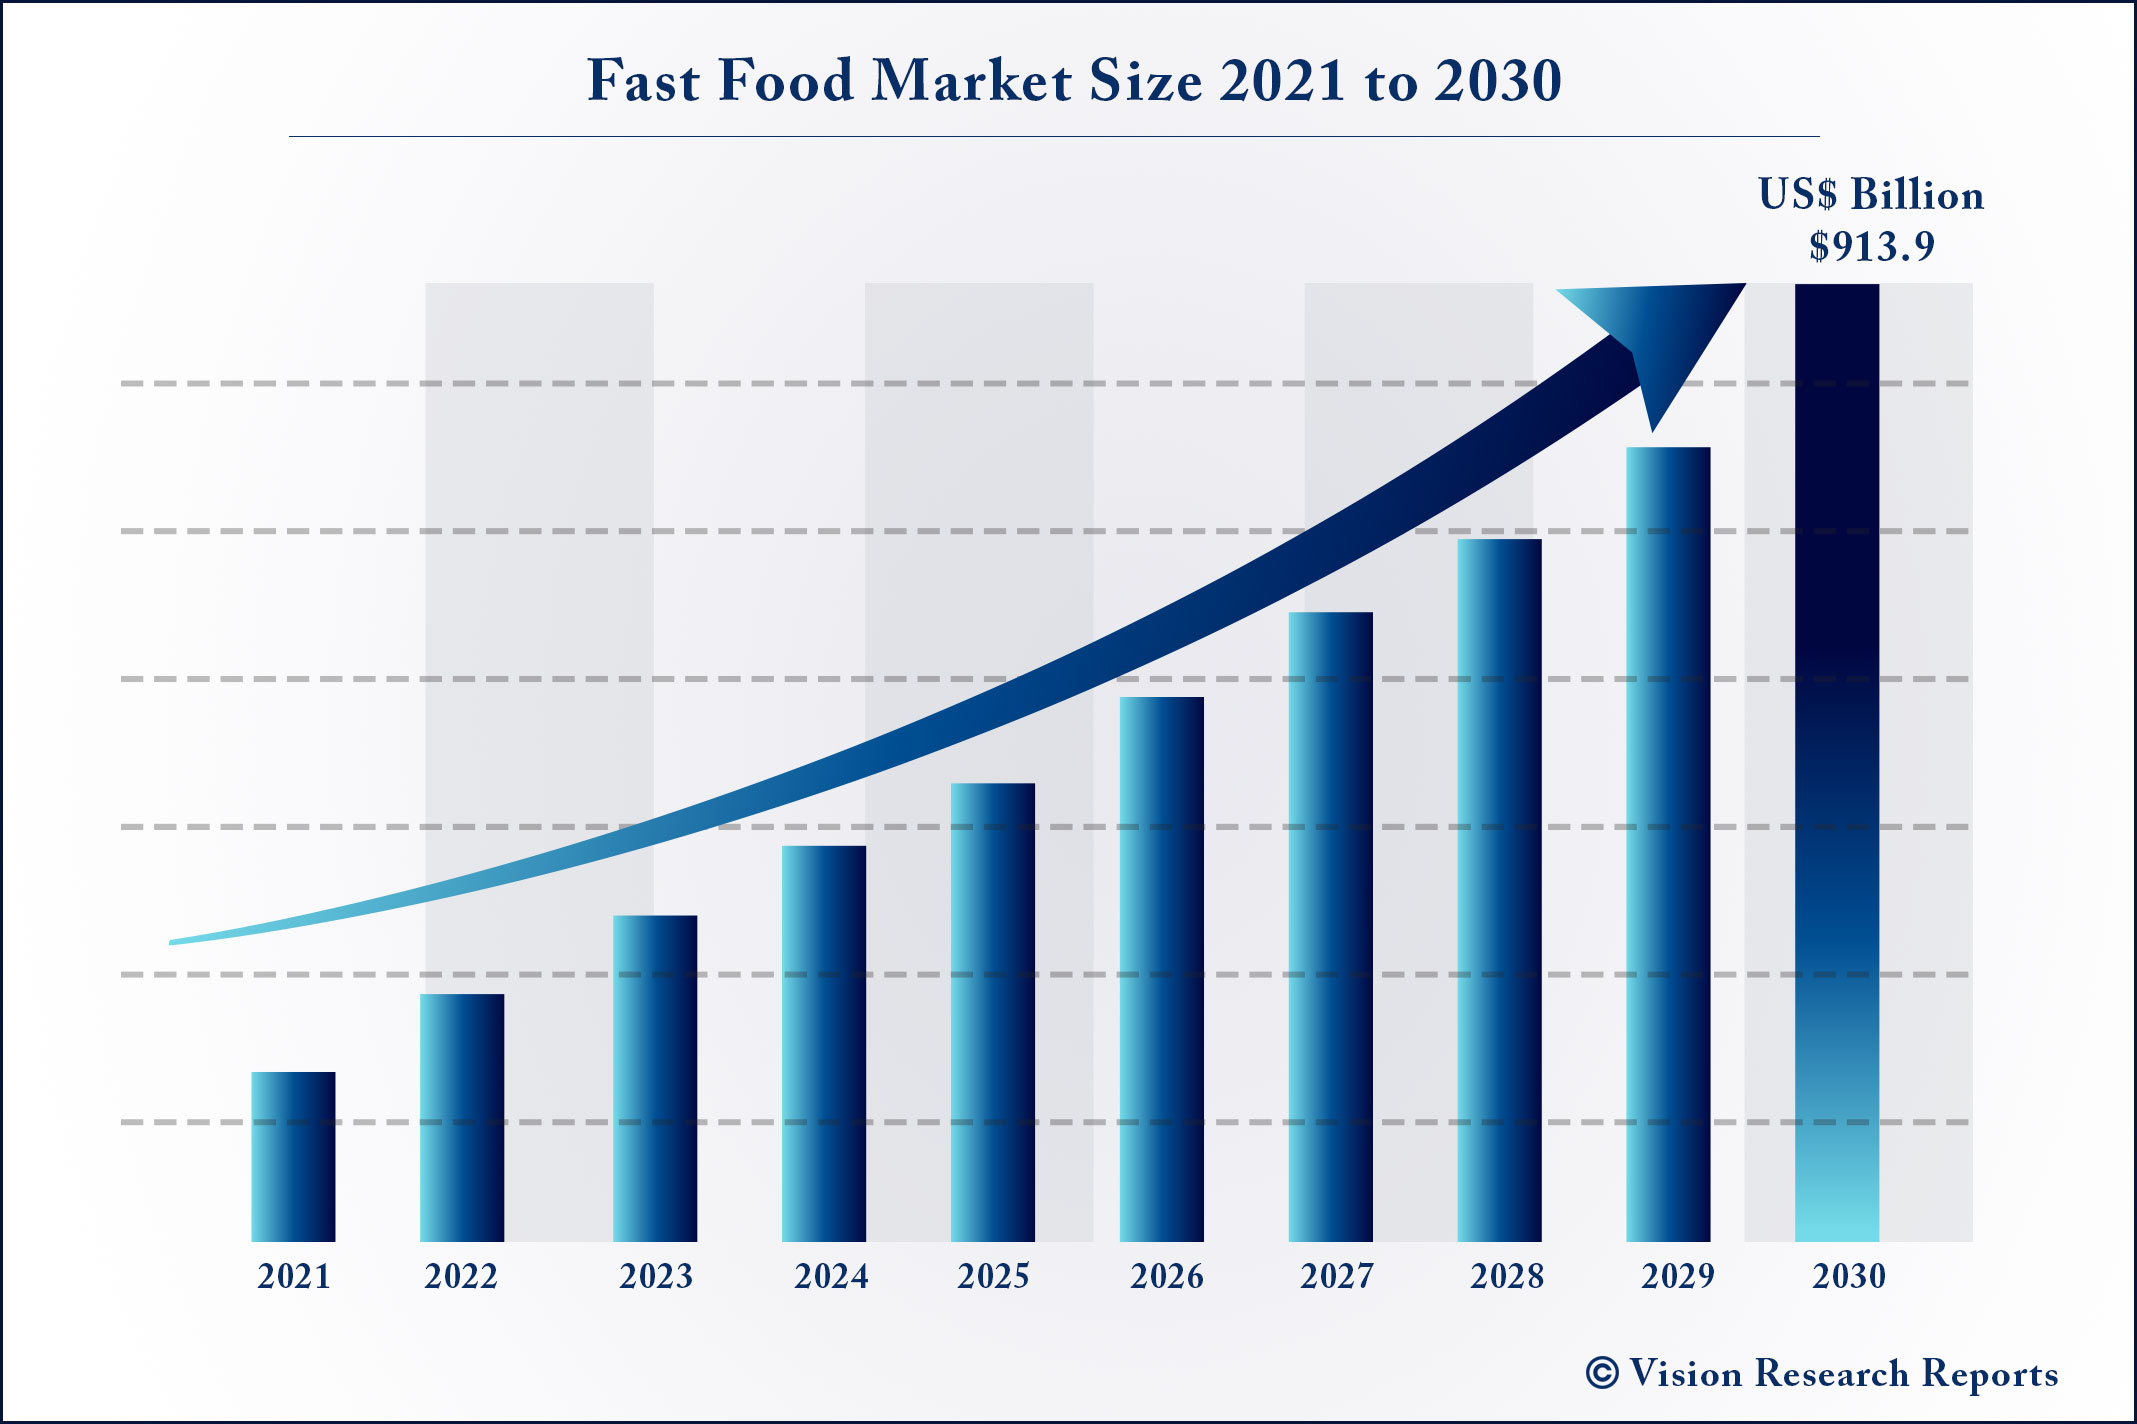 Fast Food Market Size 2021 to 2030